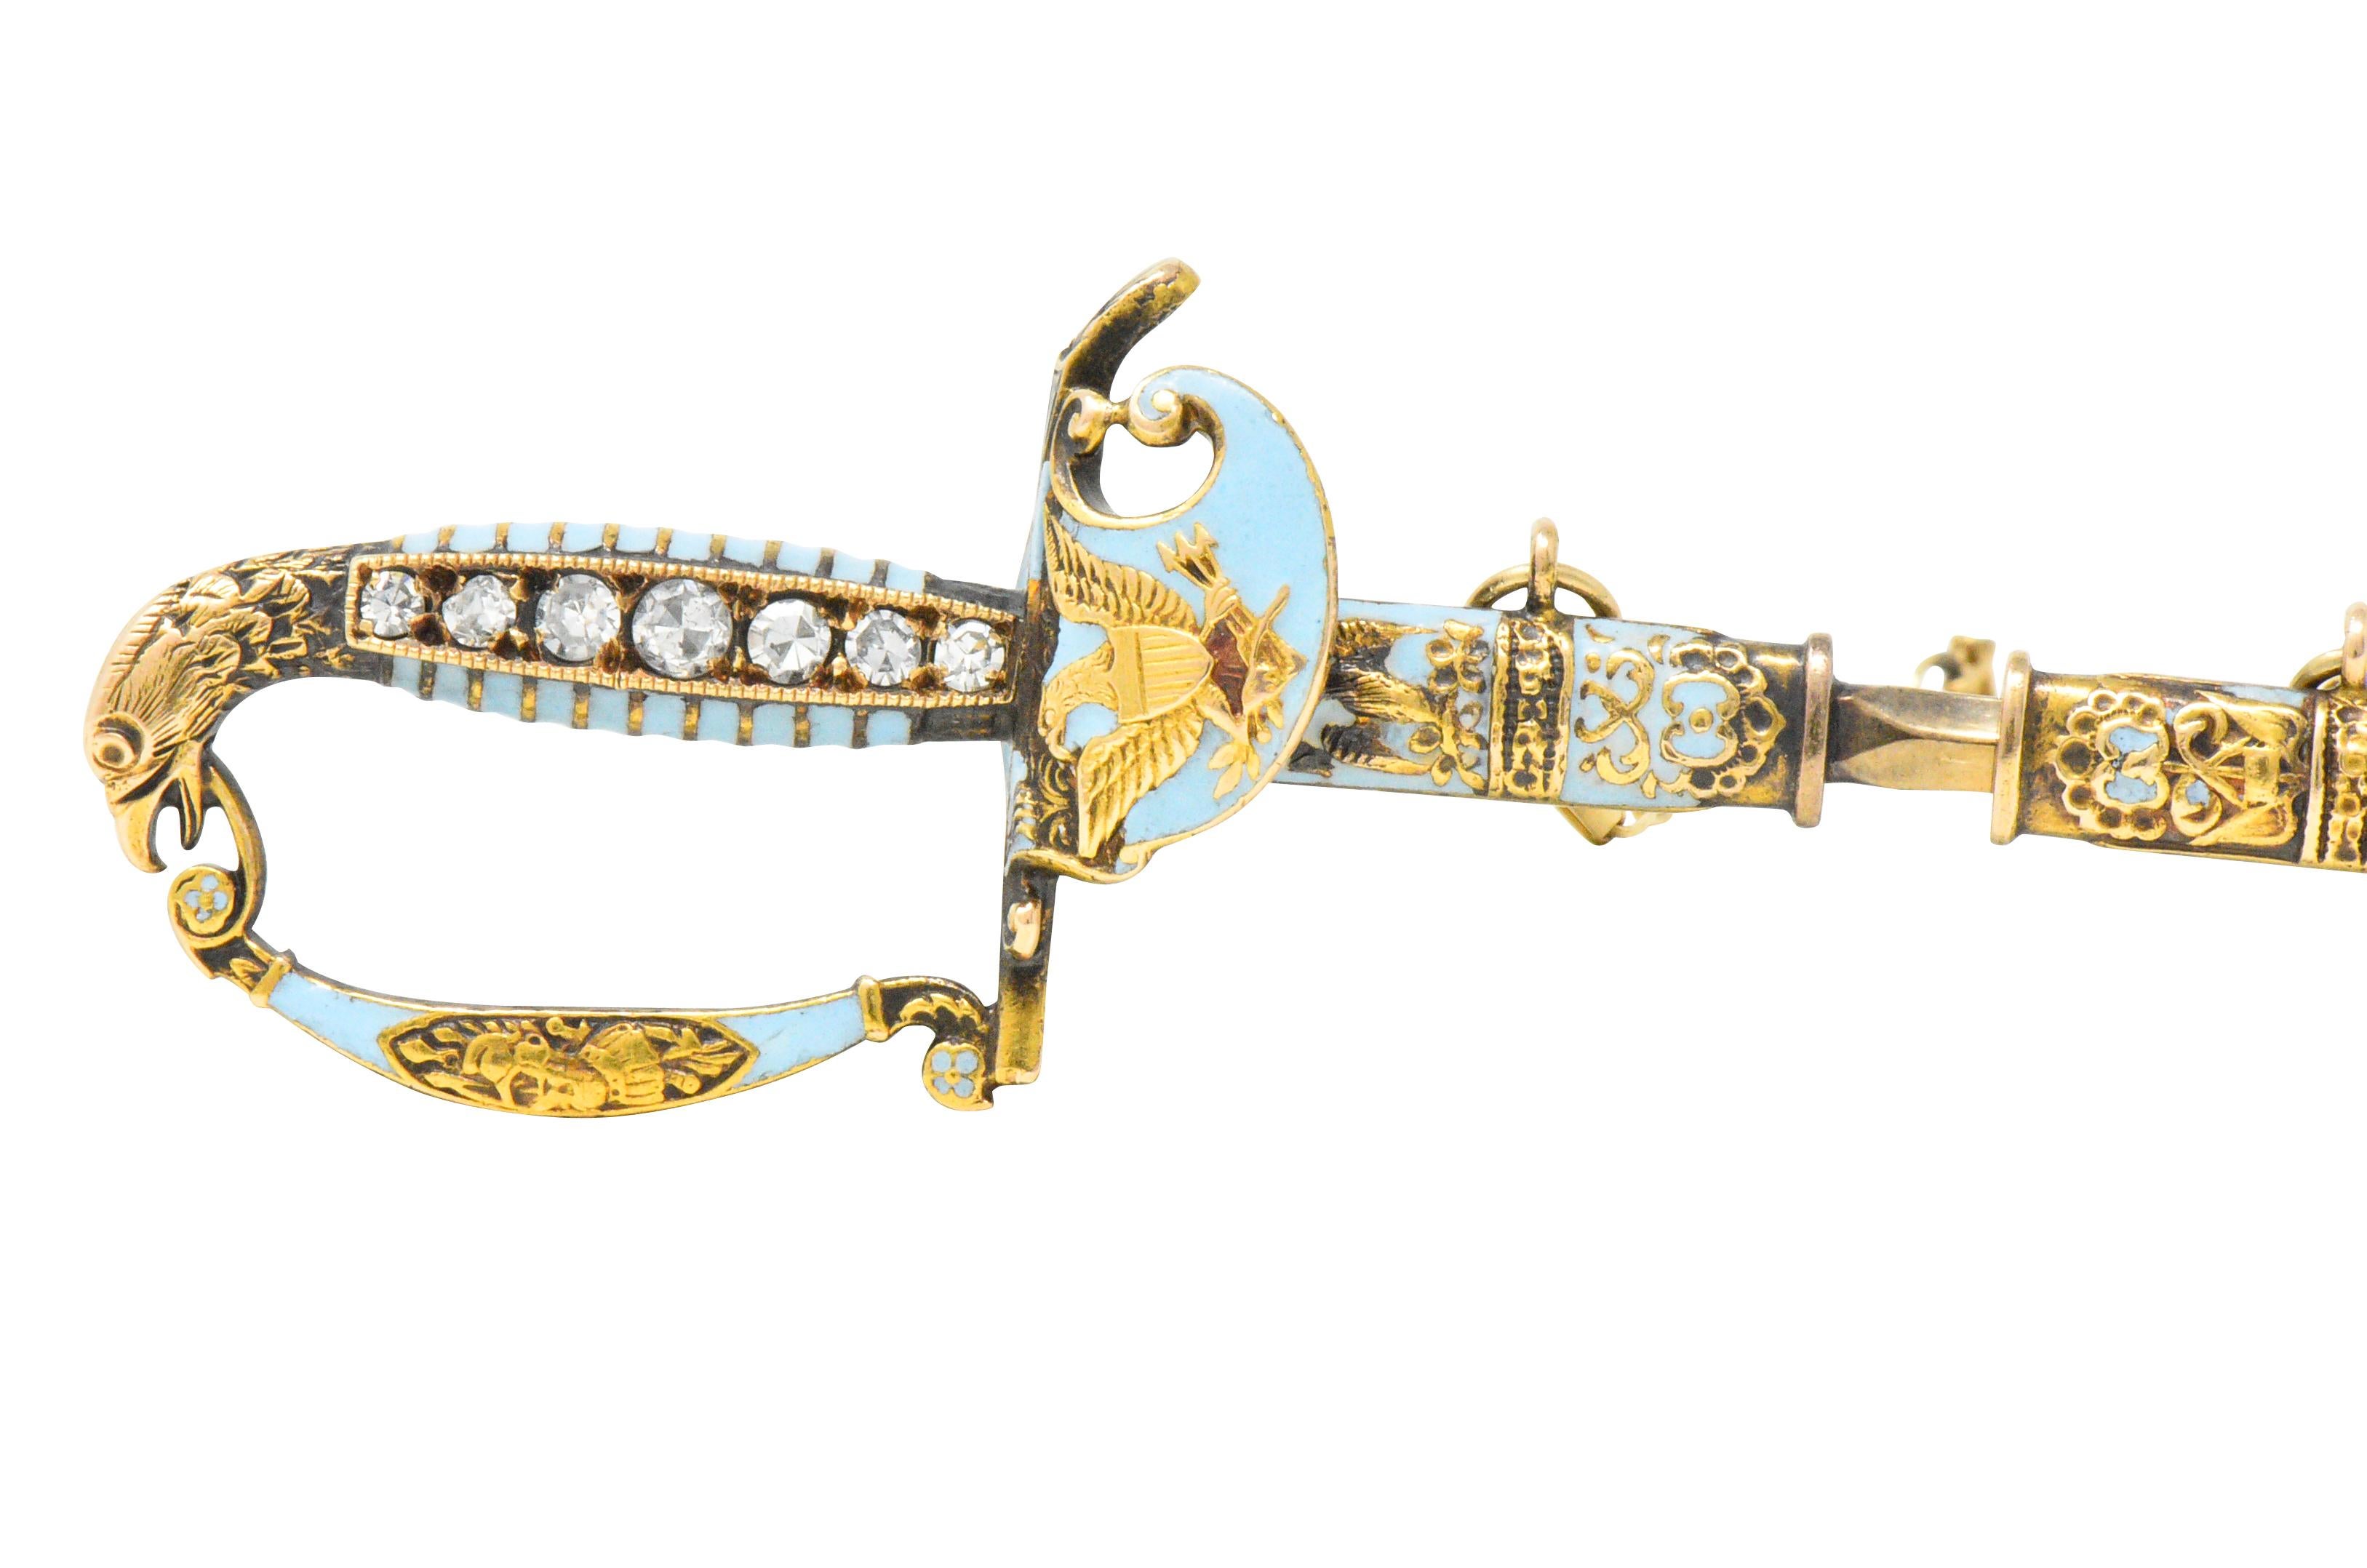 Designed as a military style saber with chain and removable sheath 

The handle is set with 7 single cut diamonds weighing approximately 0.18 carats total, eye-clean and white

With light blue enamel accenting, and engraved gold detail depicting